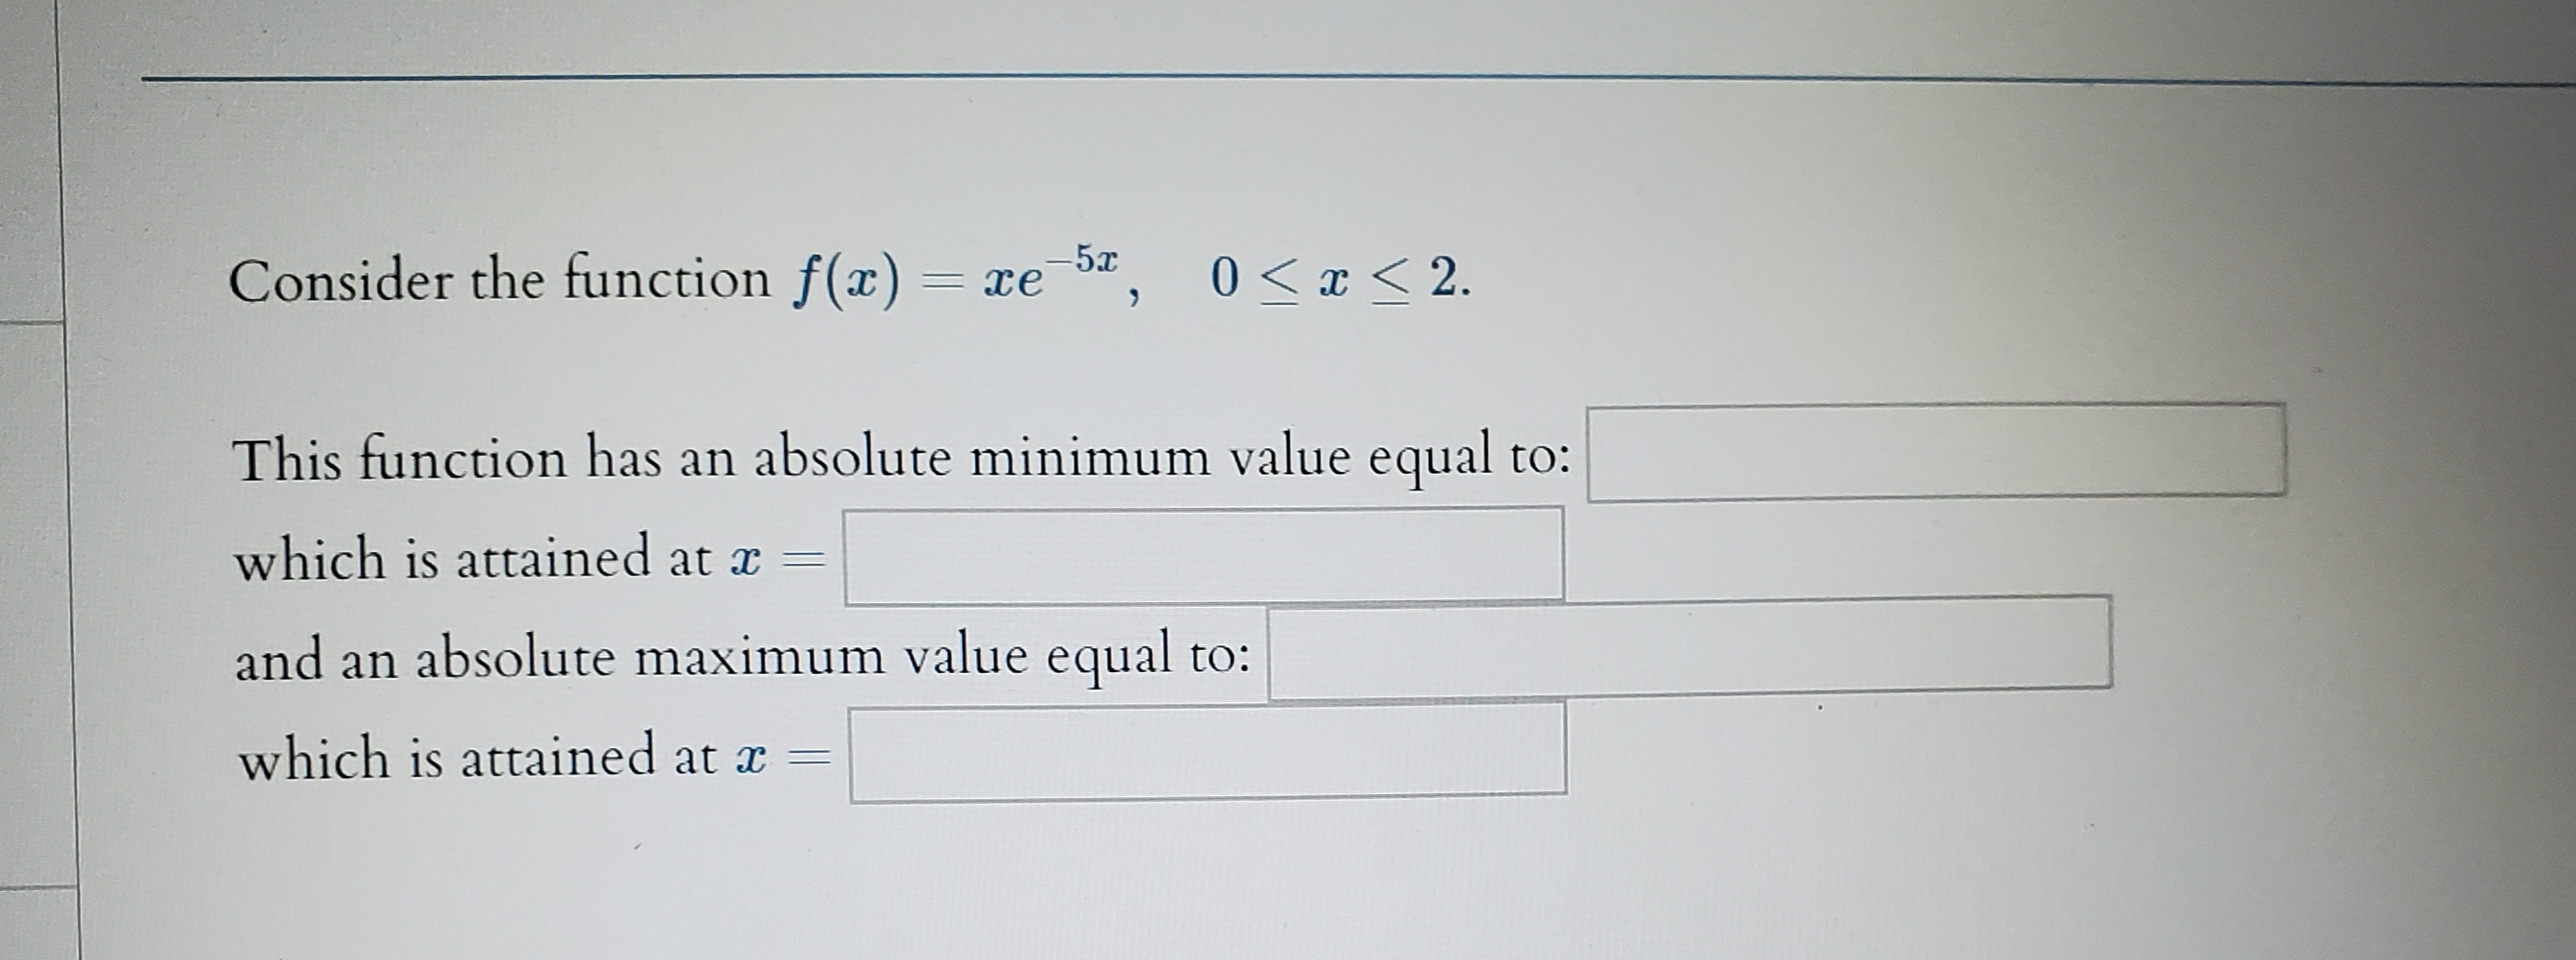 Consider the function f(x)
xe 5,
-5x
0 x2.
This function has an absolute minimum value equal to:
which is attained at x
and an absolute maximum value equal to:
which is attained at x
